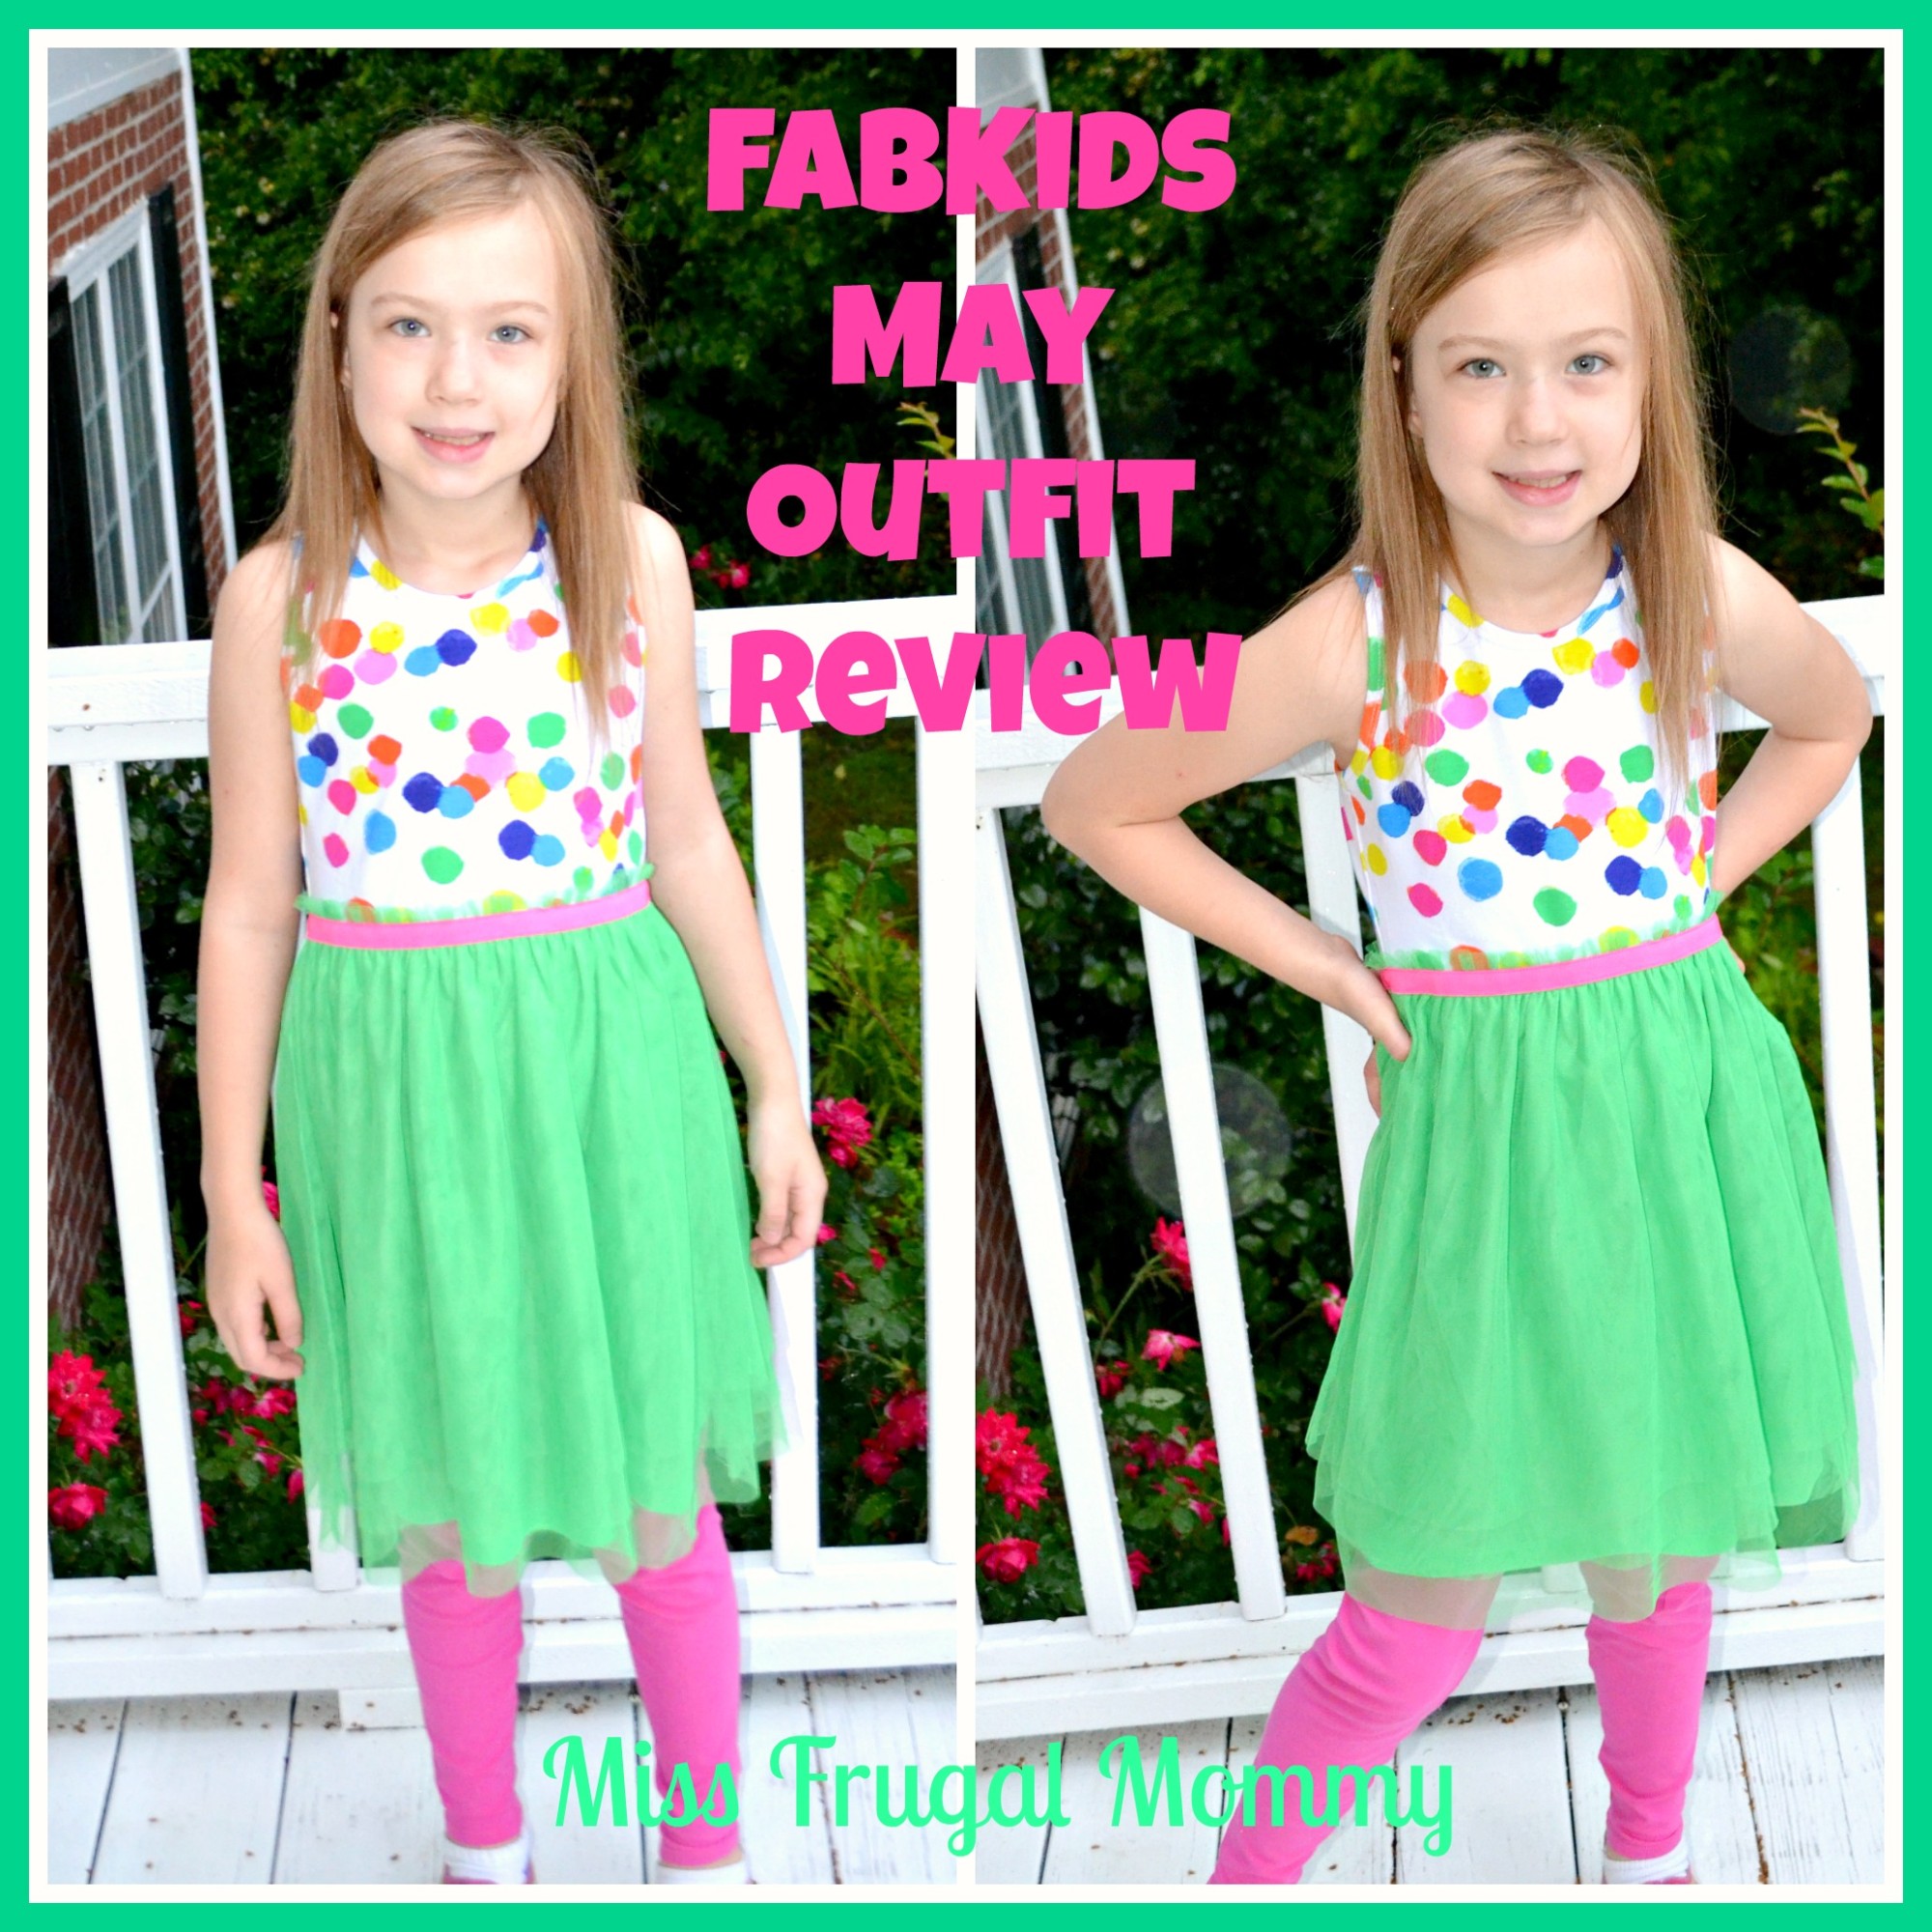 FabKids May Outfit Review